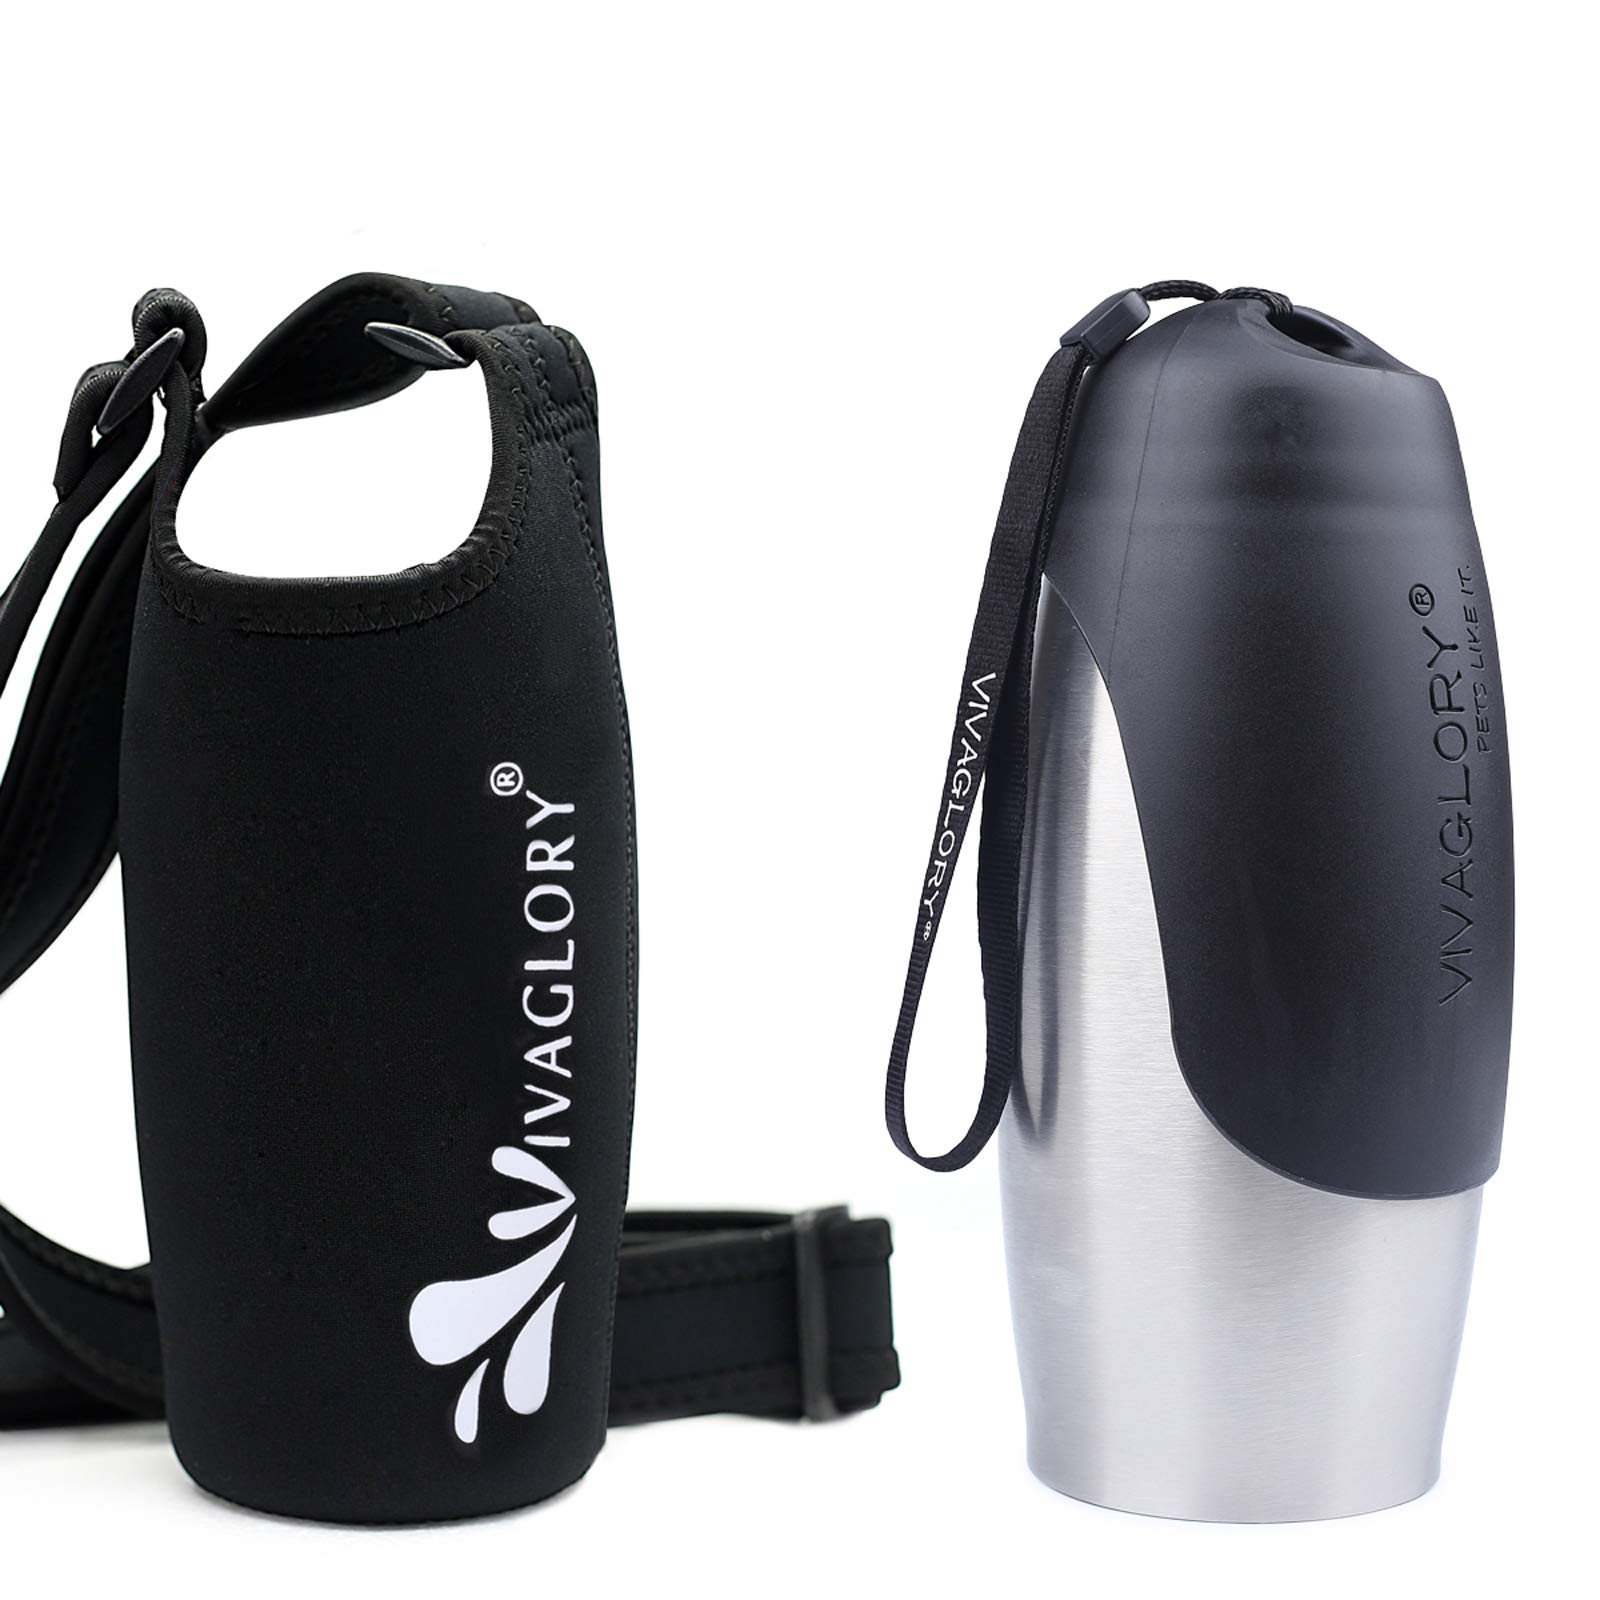 Made Easy Kit Neoprene Water Bottle Carrier Holder Bag Pouch with  Adjustable Shoulder Strap Perfect for Carrying Stainless